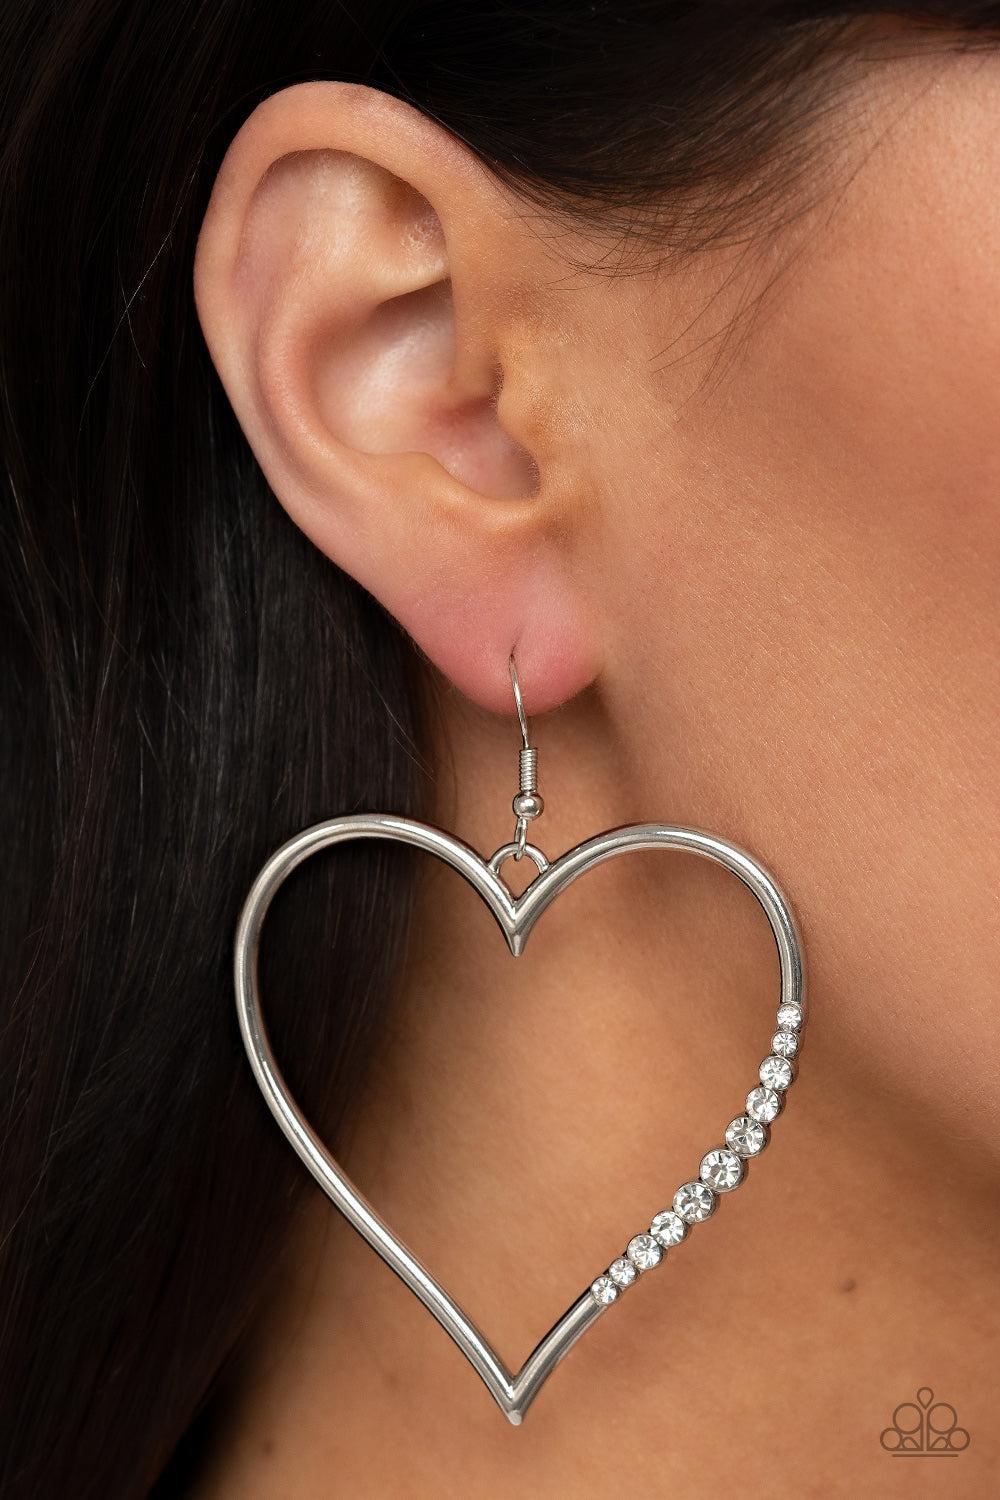 Bewitched Kiss White Rhinestone Heart Earrings - Paparazzi Accessories- on model - CarasShop.com - $5 Jewelry by Cara Jewels